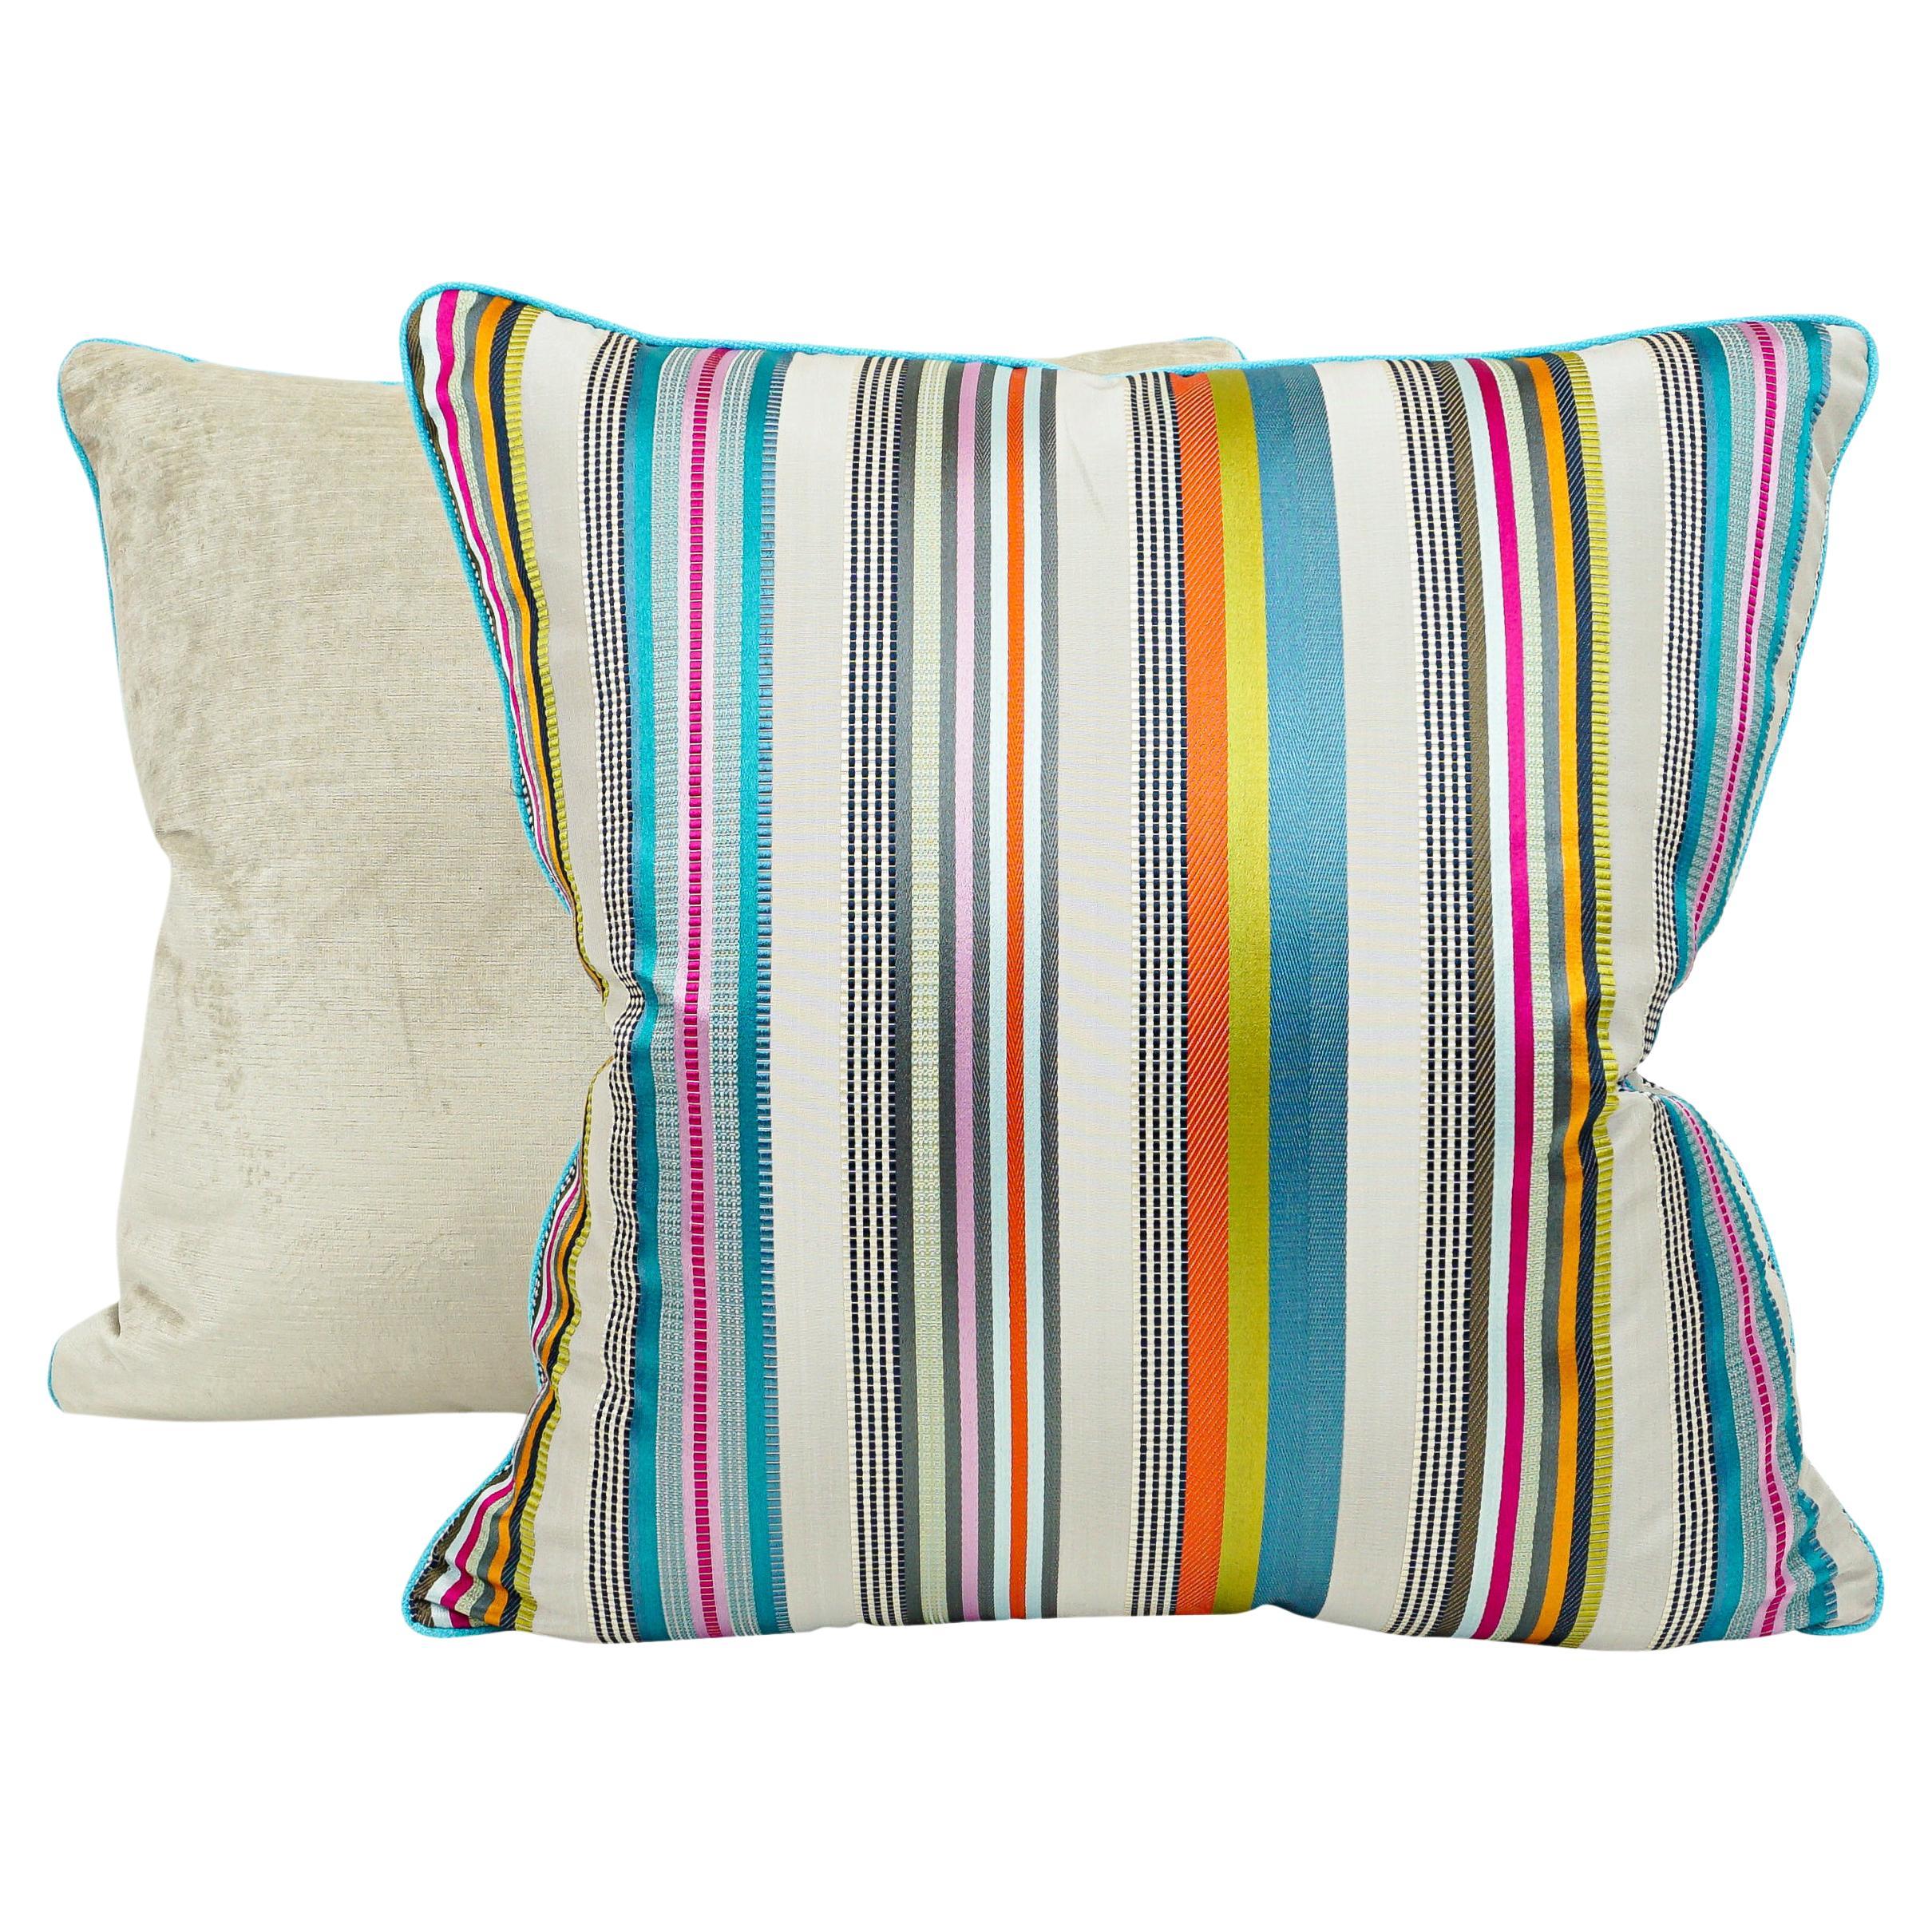 Throw Pillows with Colorful Satin Stripes For Sale